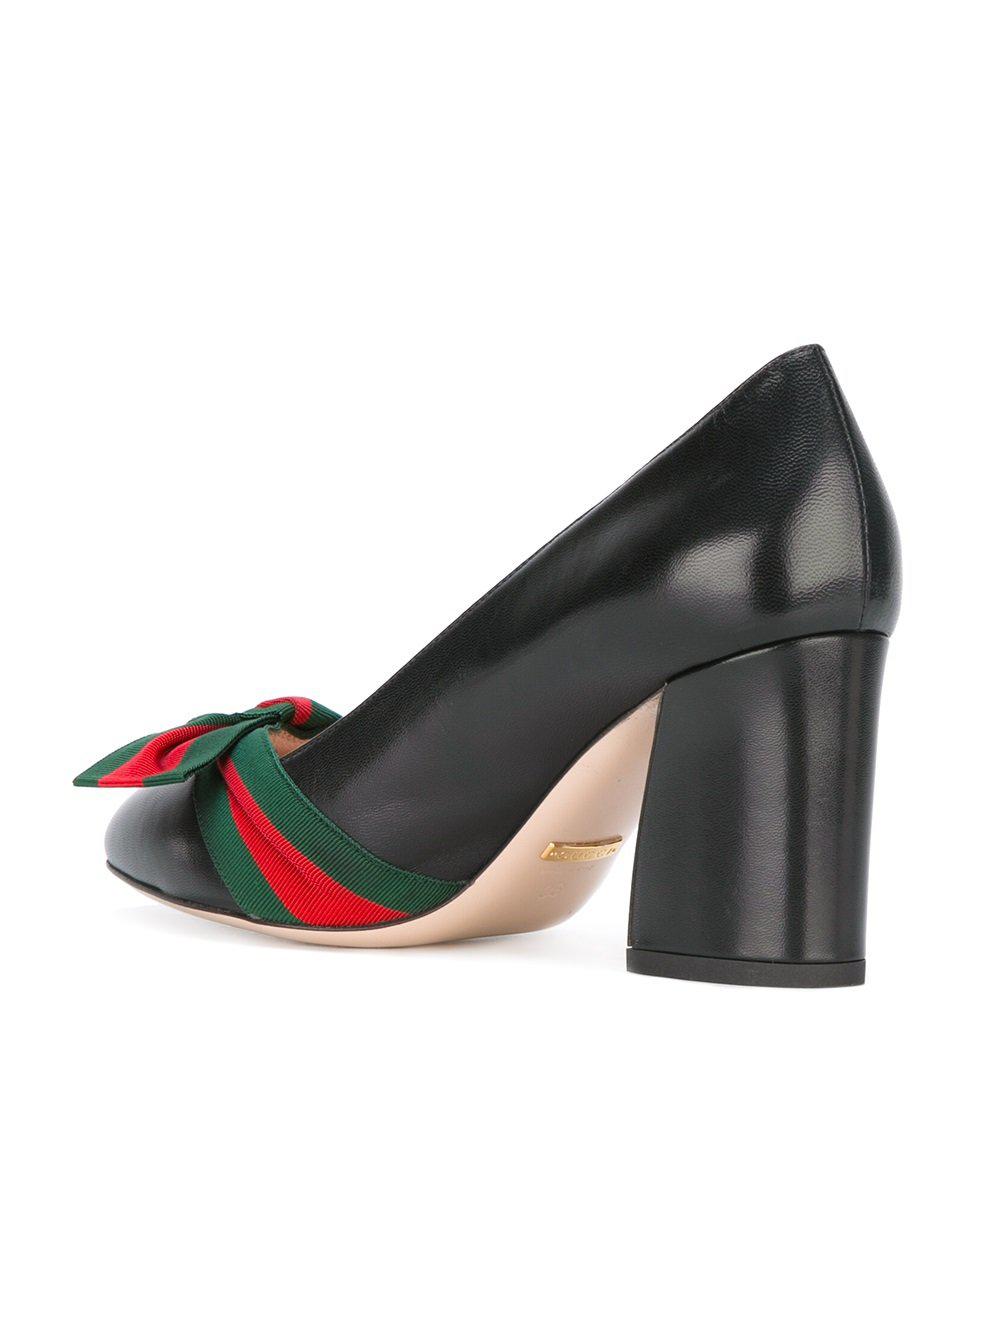 gucci shoes with bow